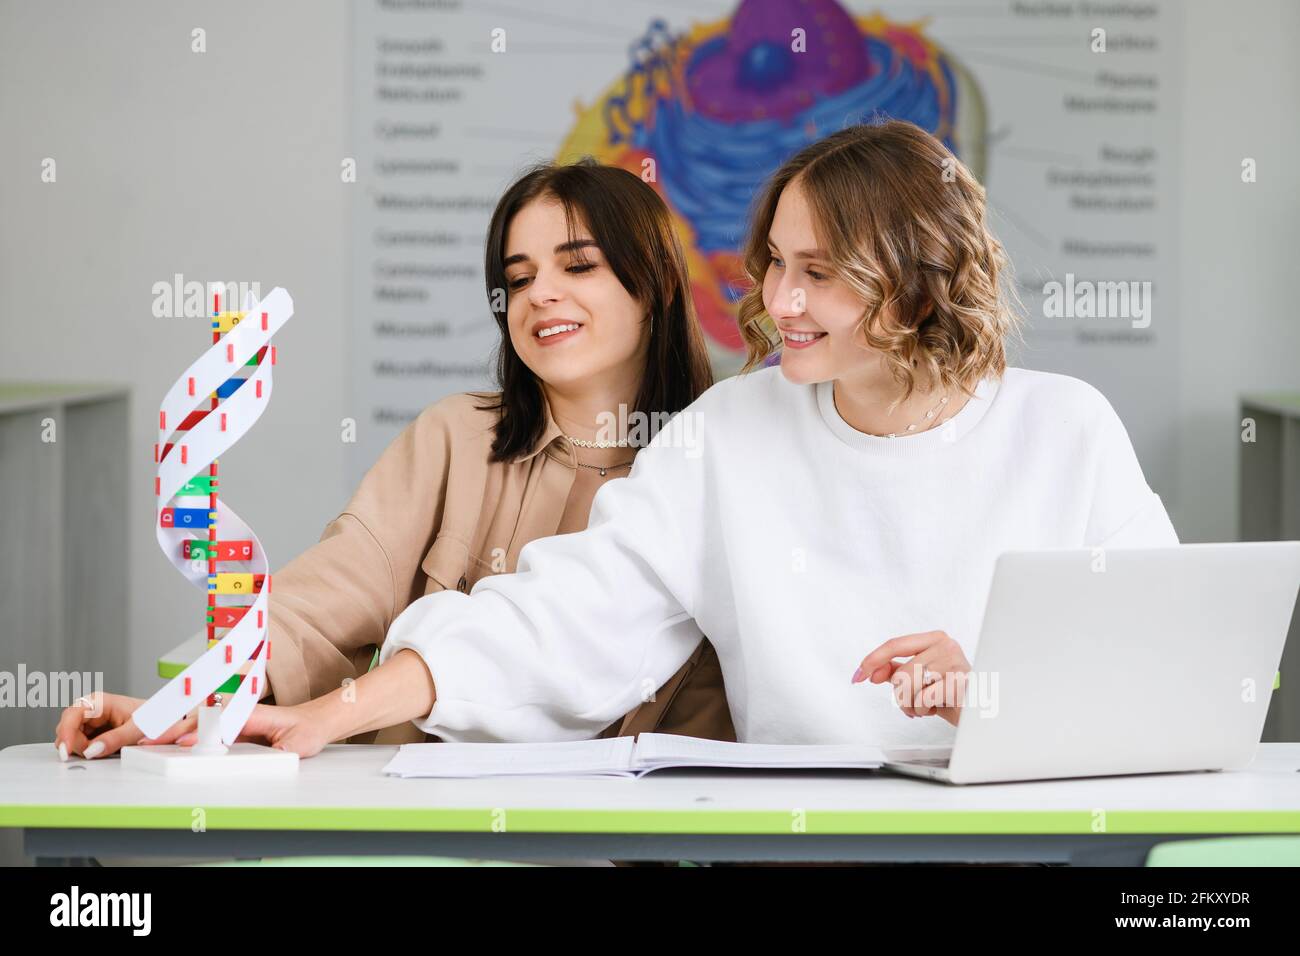 Two beautiful high school students, friends, teenagers sit at desk and study with laptop and DNA spiral model indoors Stock Photo